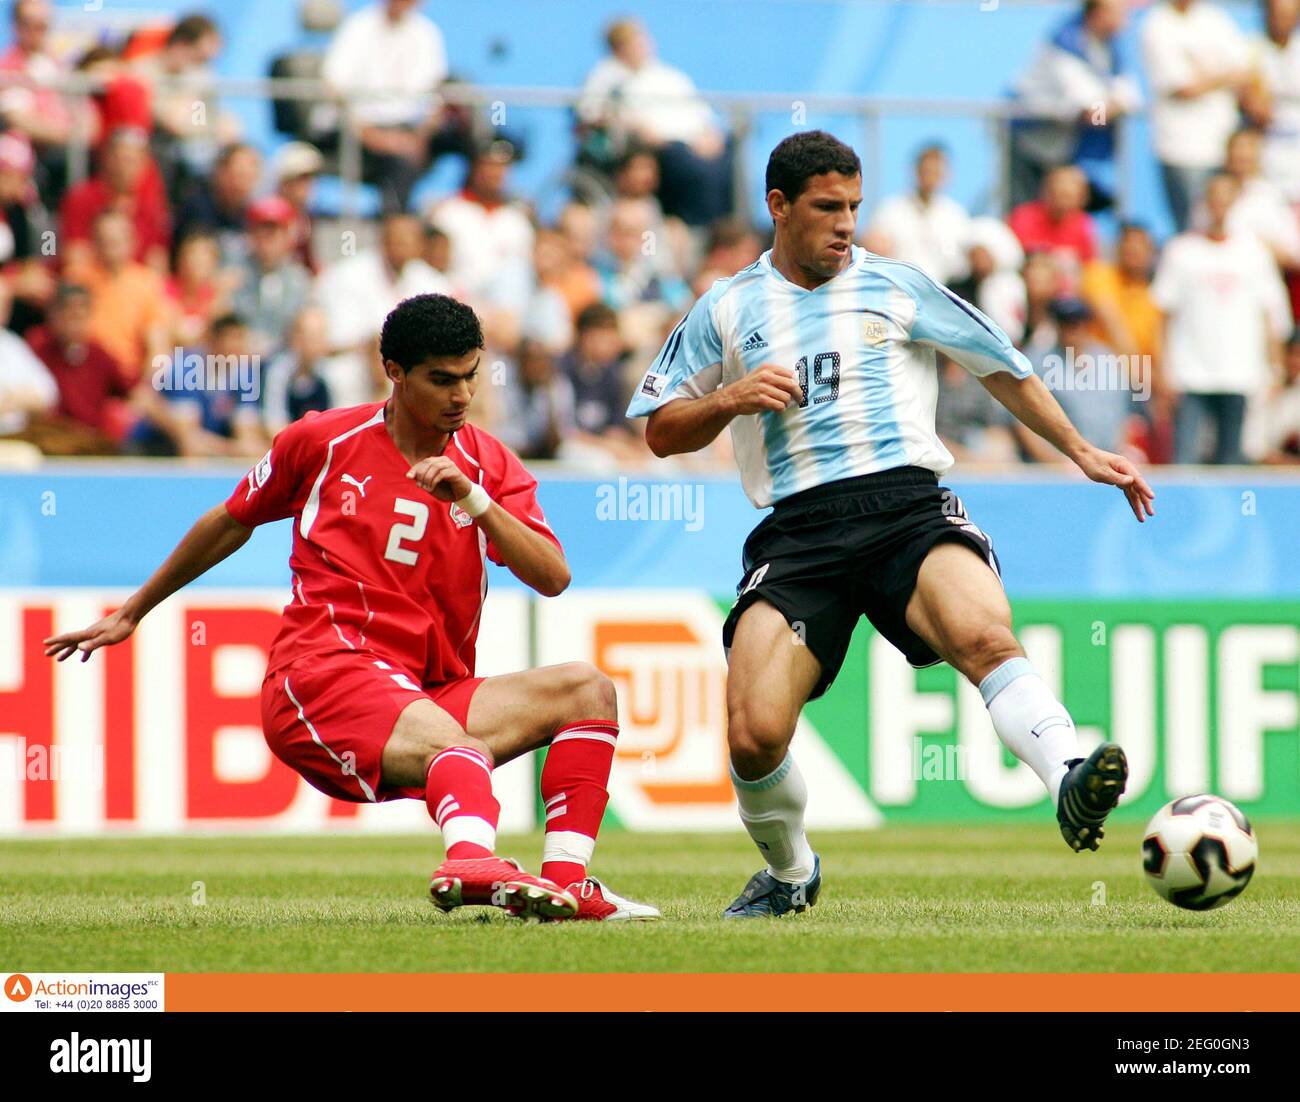 Football - Argentina v Tunisia FIFA Confederations Cup Germany 2005 Group A  - Cologne Stadium - 15/6/05 Tunisia's Karim Saidi and Argentina's Maxi  Rodriguez in action Mandatory Credit: Action Images / Andrew Couldridge  Livepic Stock Photo - Alamy